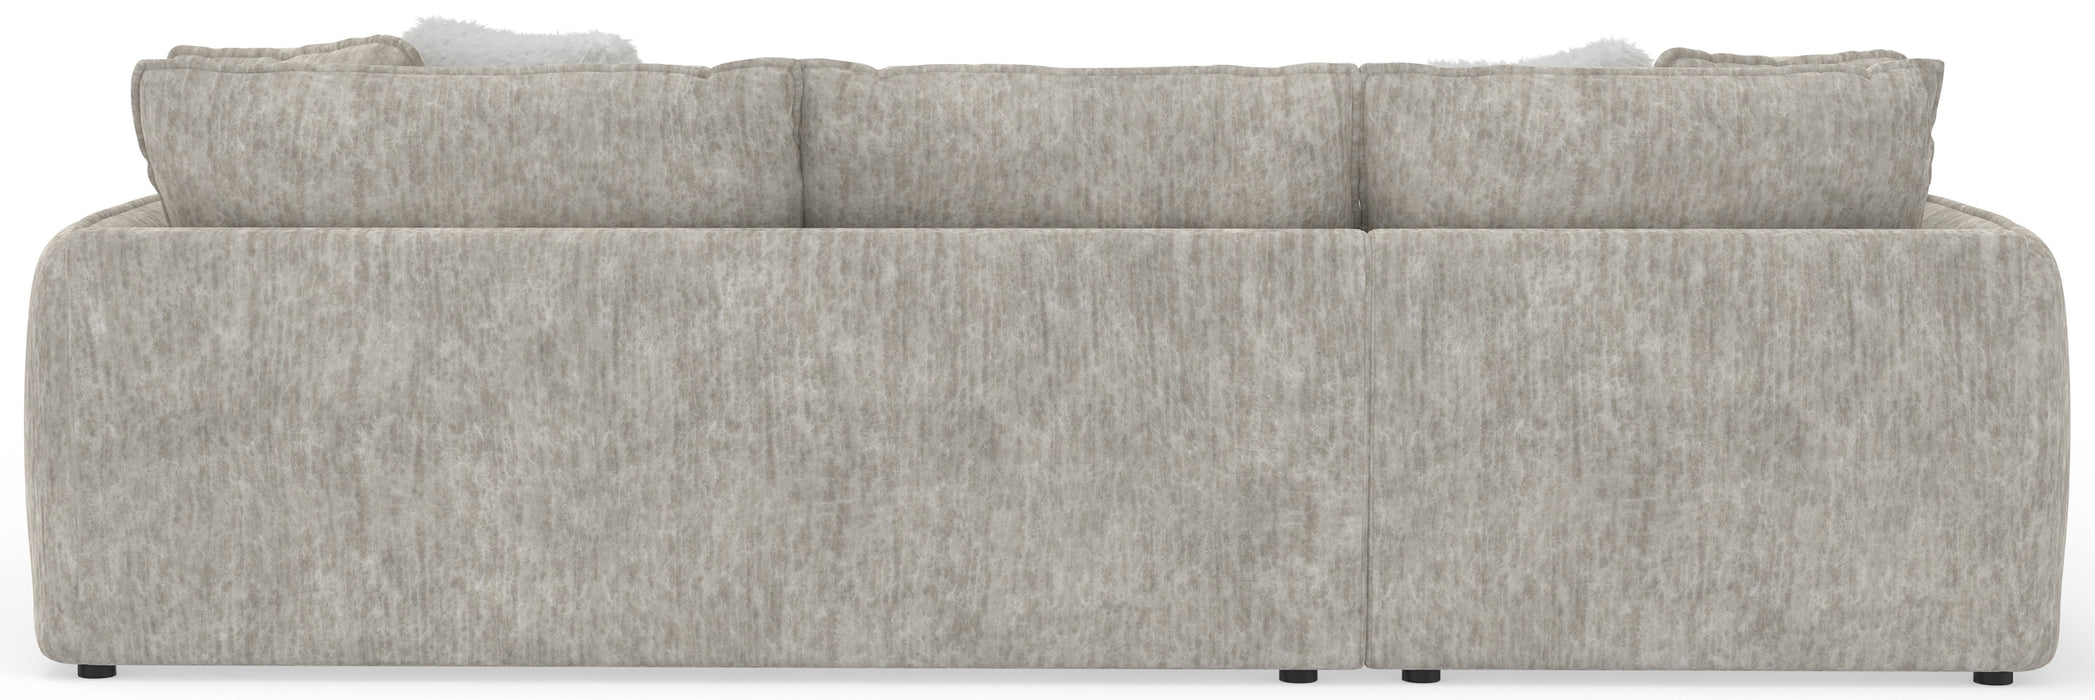 Bucktown - 2 Piece Sofa / Chaise With Extra Thick Cuddler Seat Cushions & Cocktail Ottoman